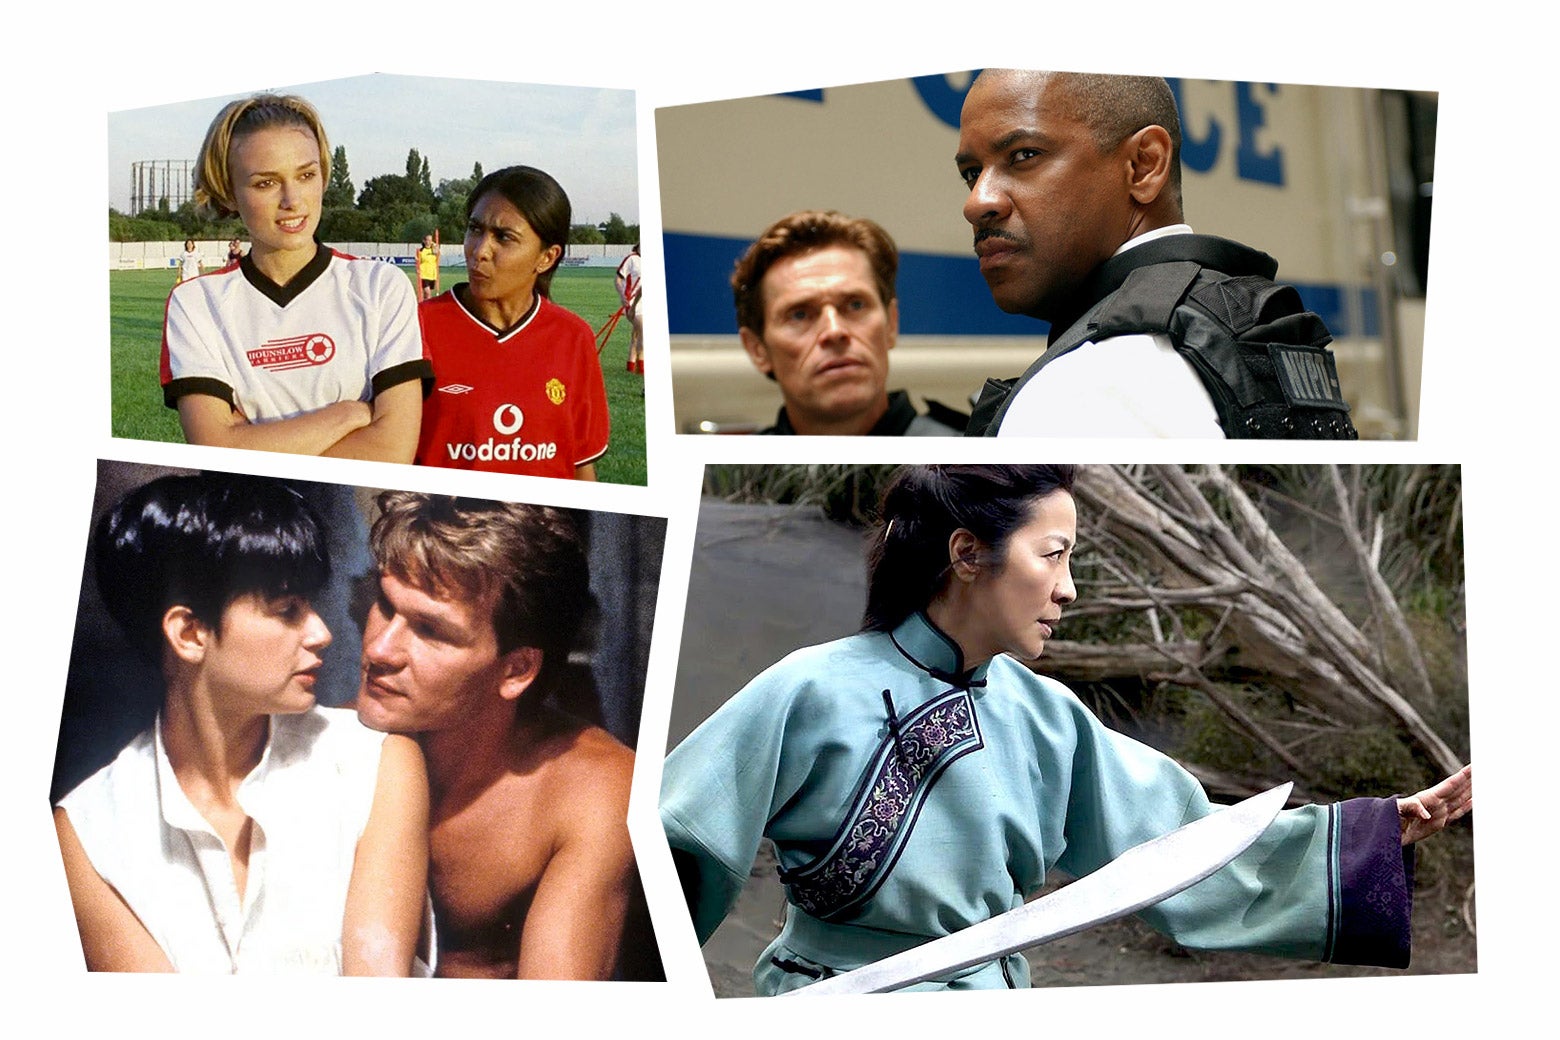 Clockwise: A still of Keira Knightley and Parminder Nagra in Bend It Like Beckham; a still of Willem Dafoe and Denzel Washington in Inside Man; a still of Michelle Yeoh in Crouching Tiger, Hidden Dragon; a still of Patrick Swayze and Demi Moore in Ghost. 